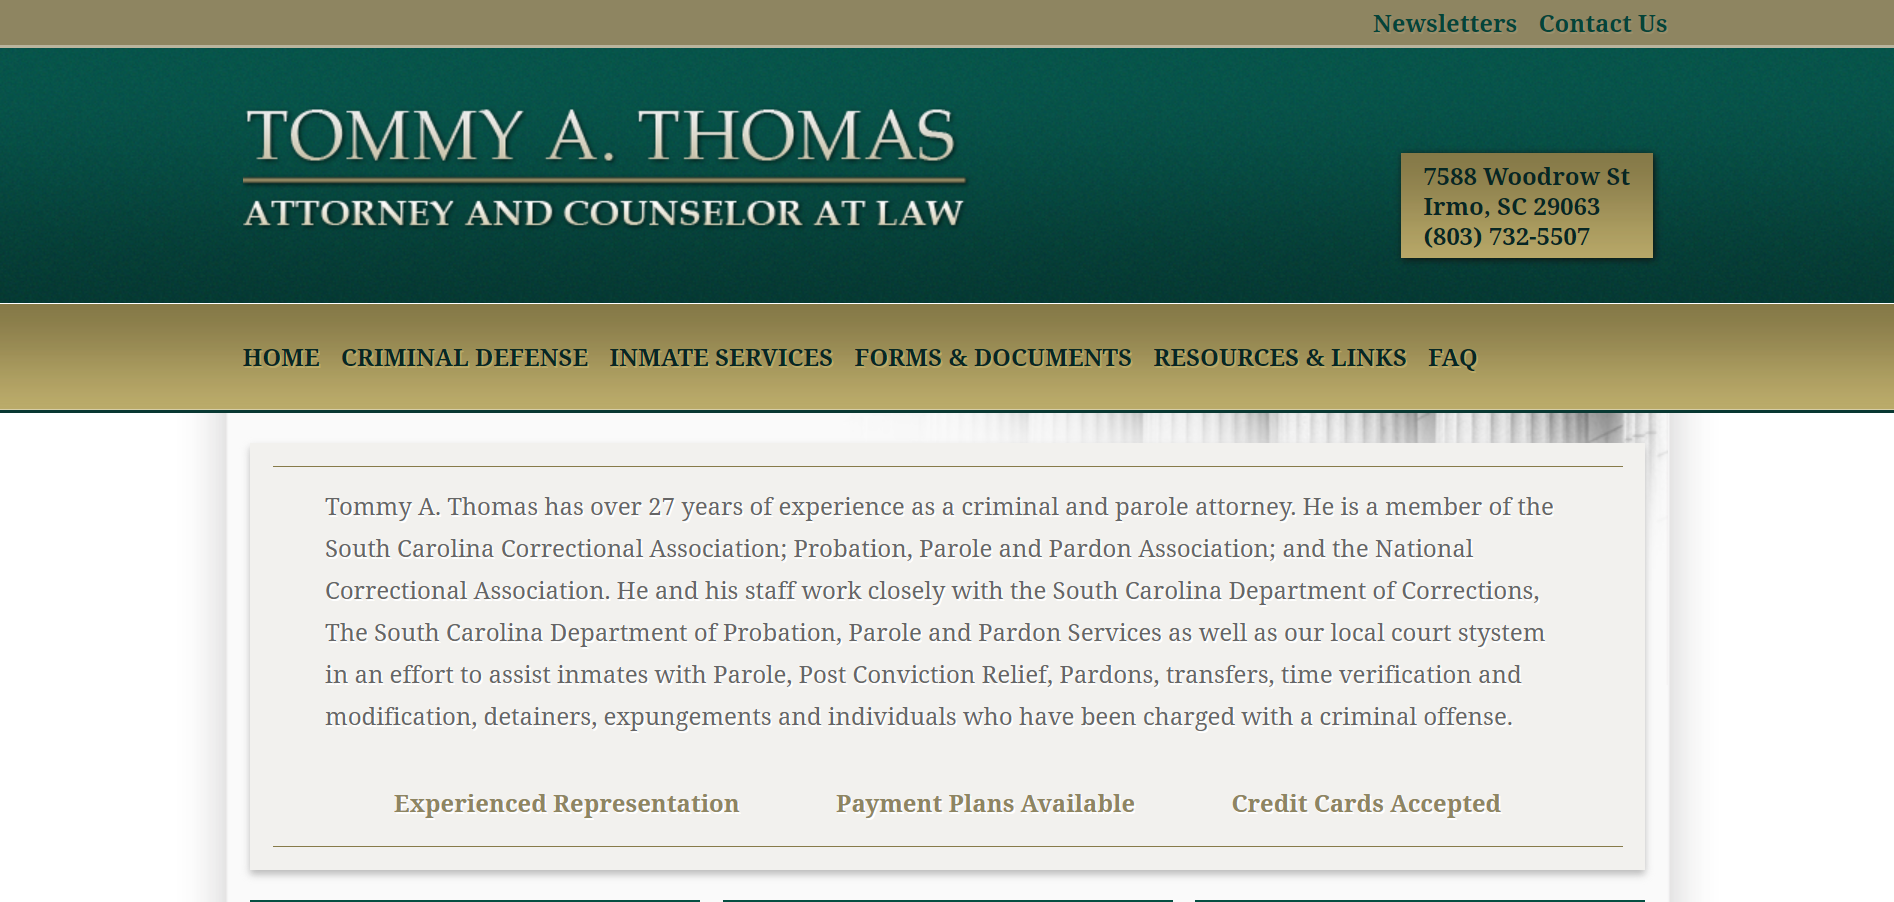 Tommy A Thomas - Top Lawyer in Irmo SC